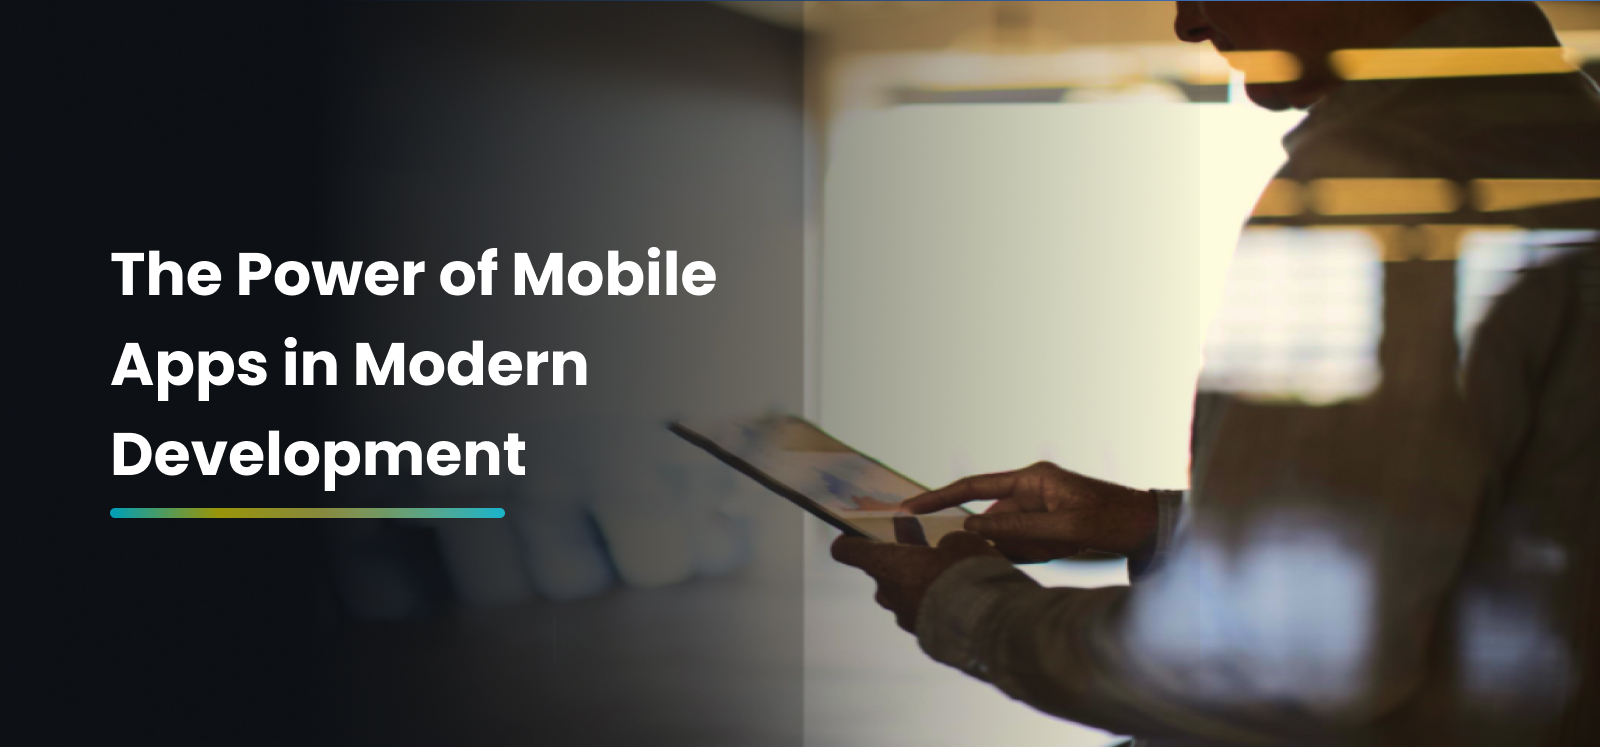 The Power of Mobile Apps in Modern Development